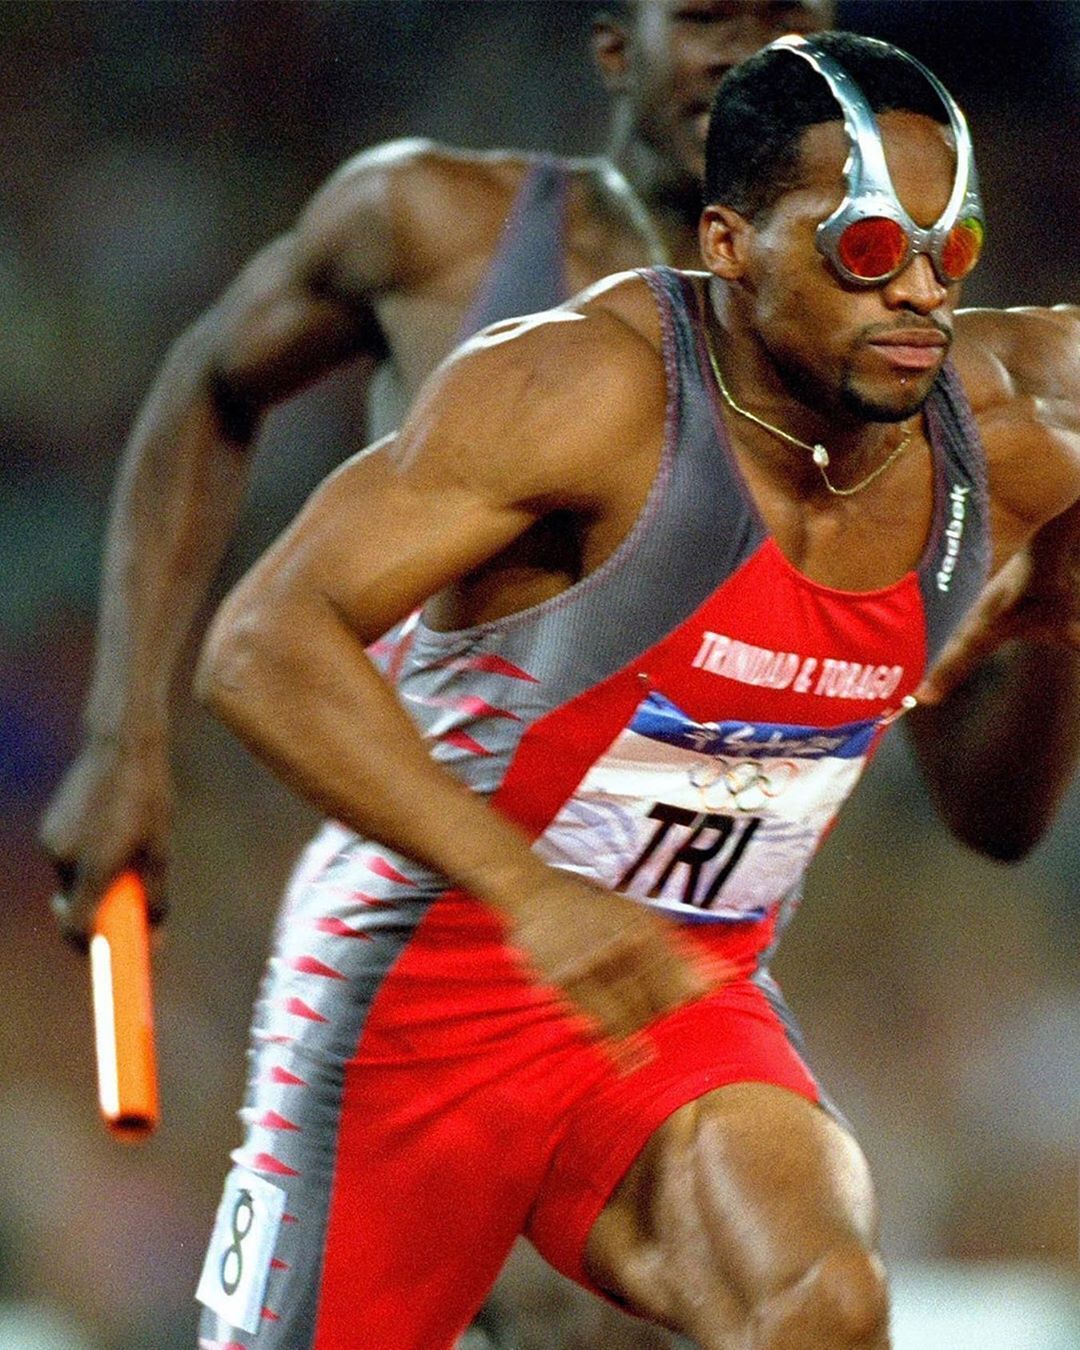 Grailed On Instagram: “Ato Boldon Of Trinidad And Tobago Runs The Men's 4x100m Relay Semi Finals At The Sydney 2000 Olympi In 2020 Olympics, Olympic Games, Olympics